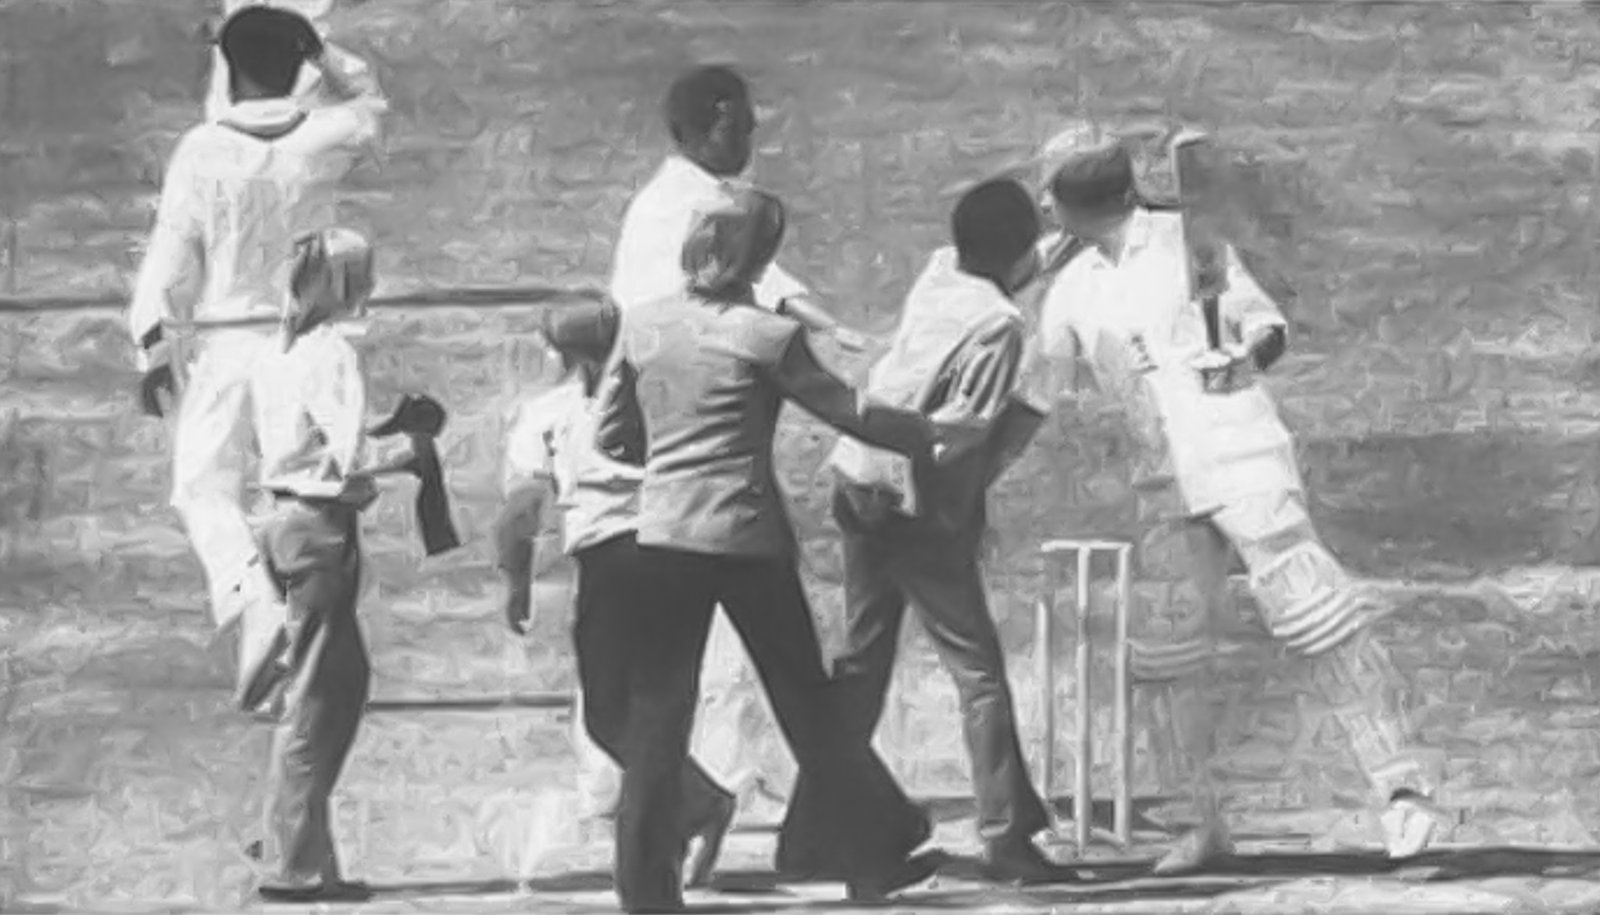 Frank Hayes is congratulated by spectators on reaching his hundred in the second innings of his Test debut, England v West Indies, 1st Test, The Oval, July 31st 1973.